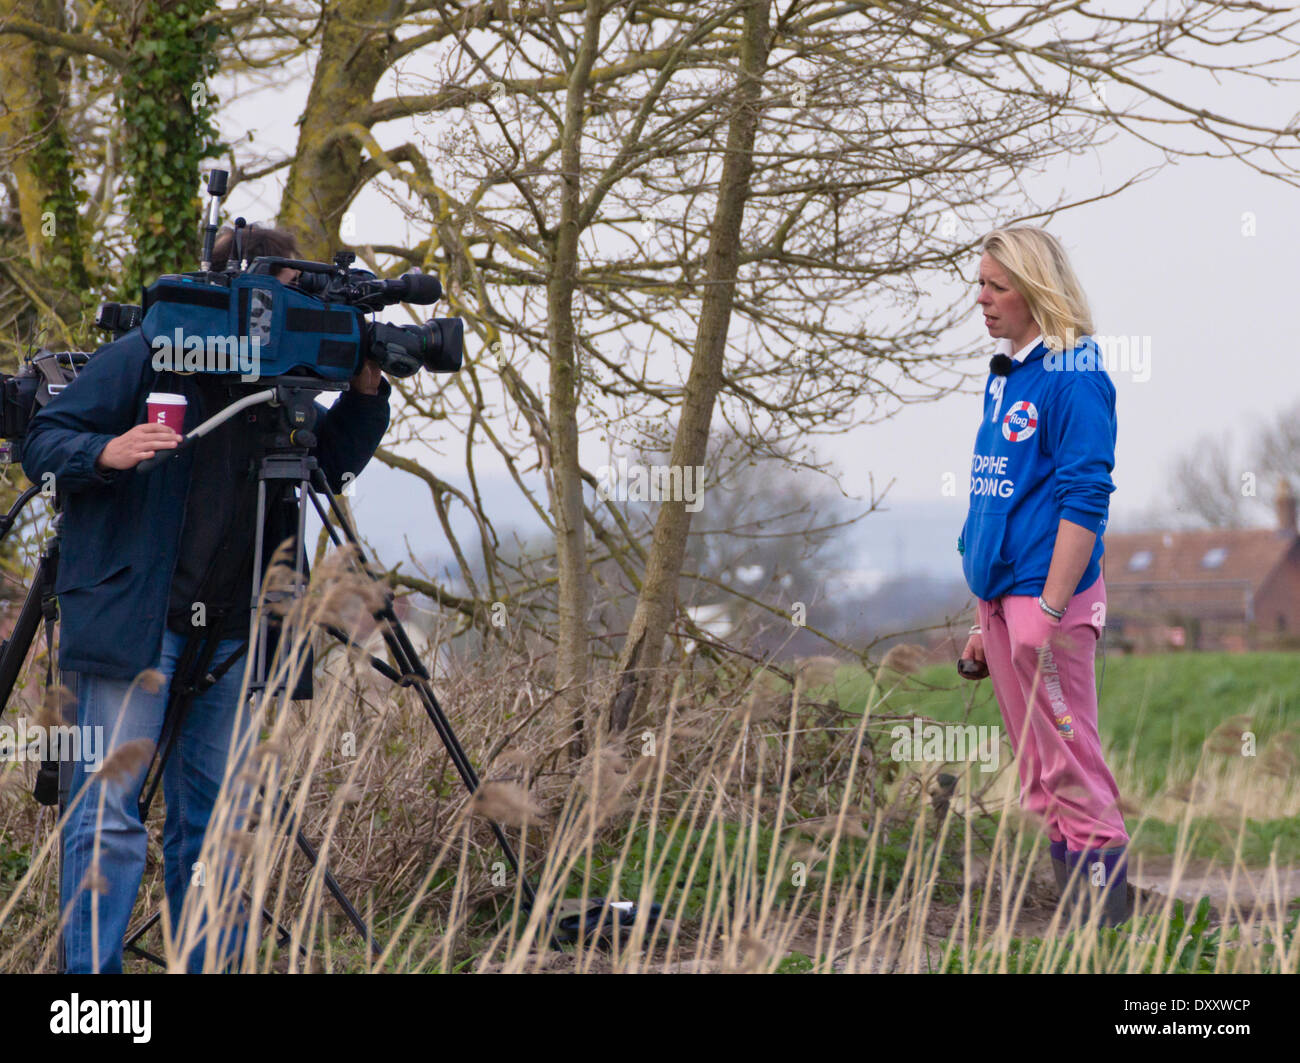 Burrowbridge, Somerset, UK. 31st March 2014. Work has commenced on the dredging of the River Parrett as part of a 20 year plan to alleviate the risk of flooding on the Somerset Levels. Bryony Sadler, a local resident affected by the flooding and a member of the Flooding on the Levels Action Group (FLAG)  is interviewed. Credit:  Mr Standfast/Alamy Live News Stock Photo